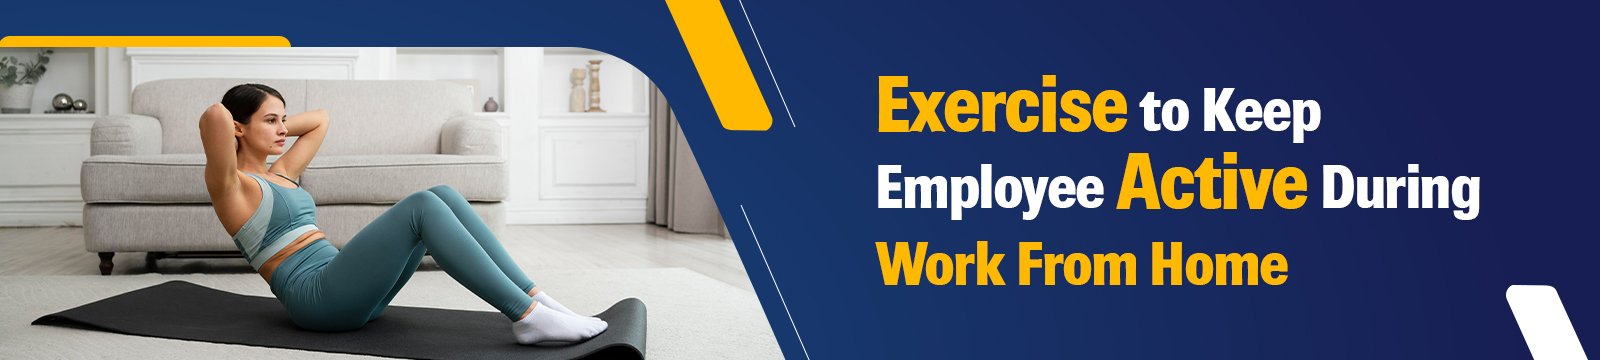 Exercise To Keep Employee Active During Work From Home